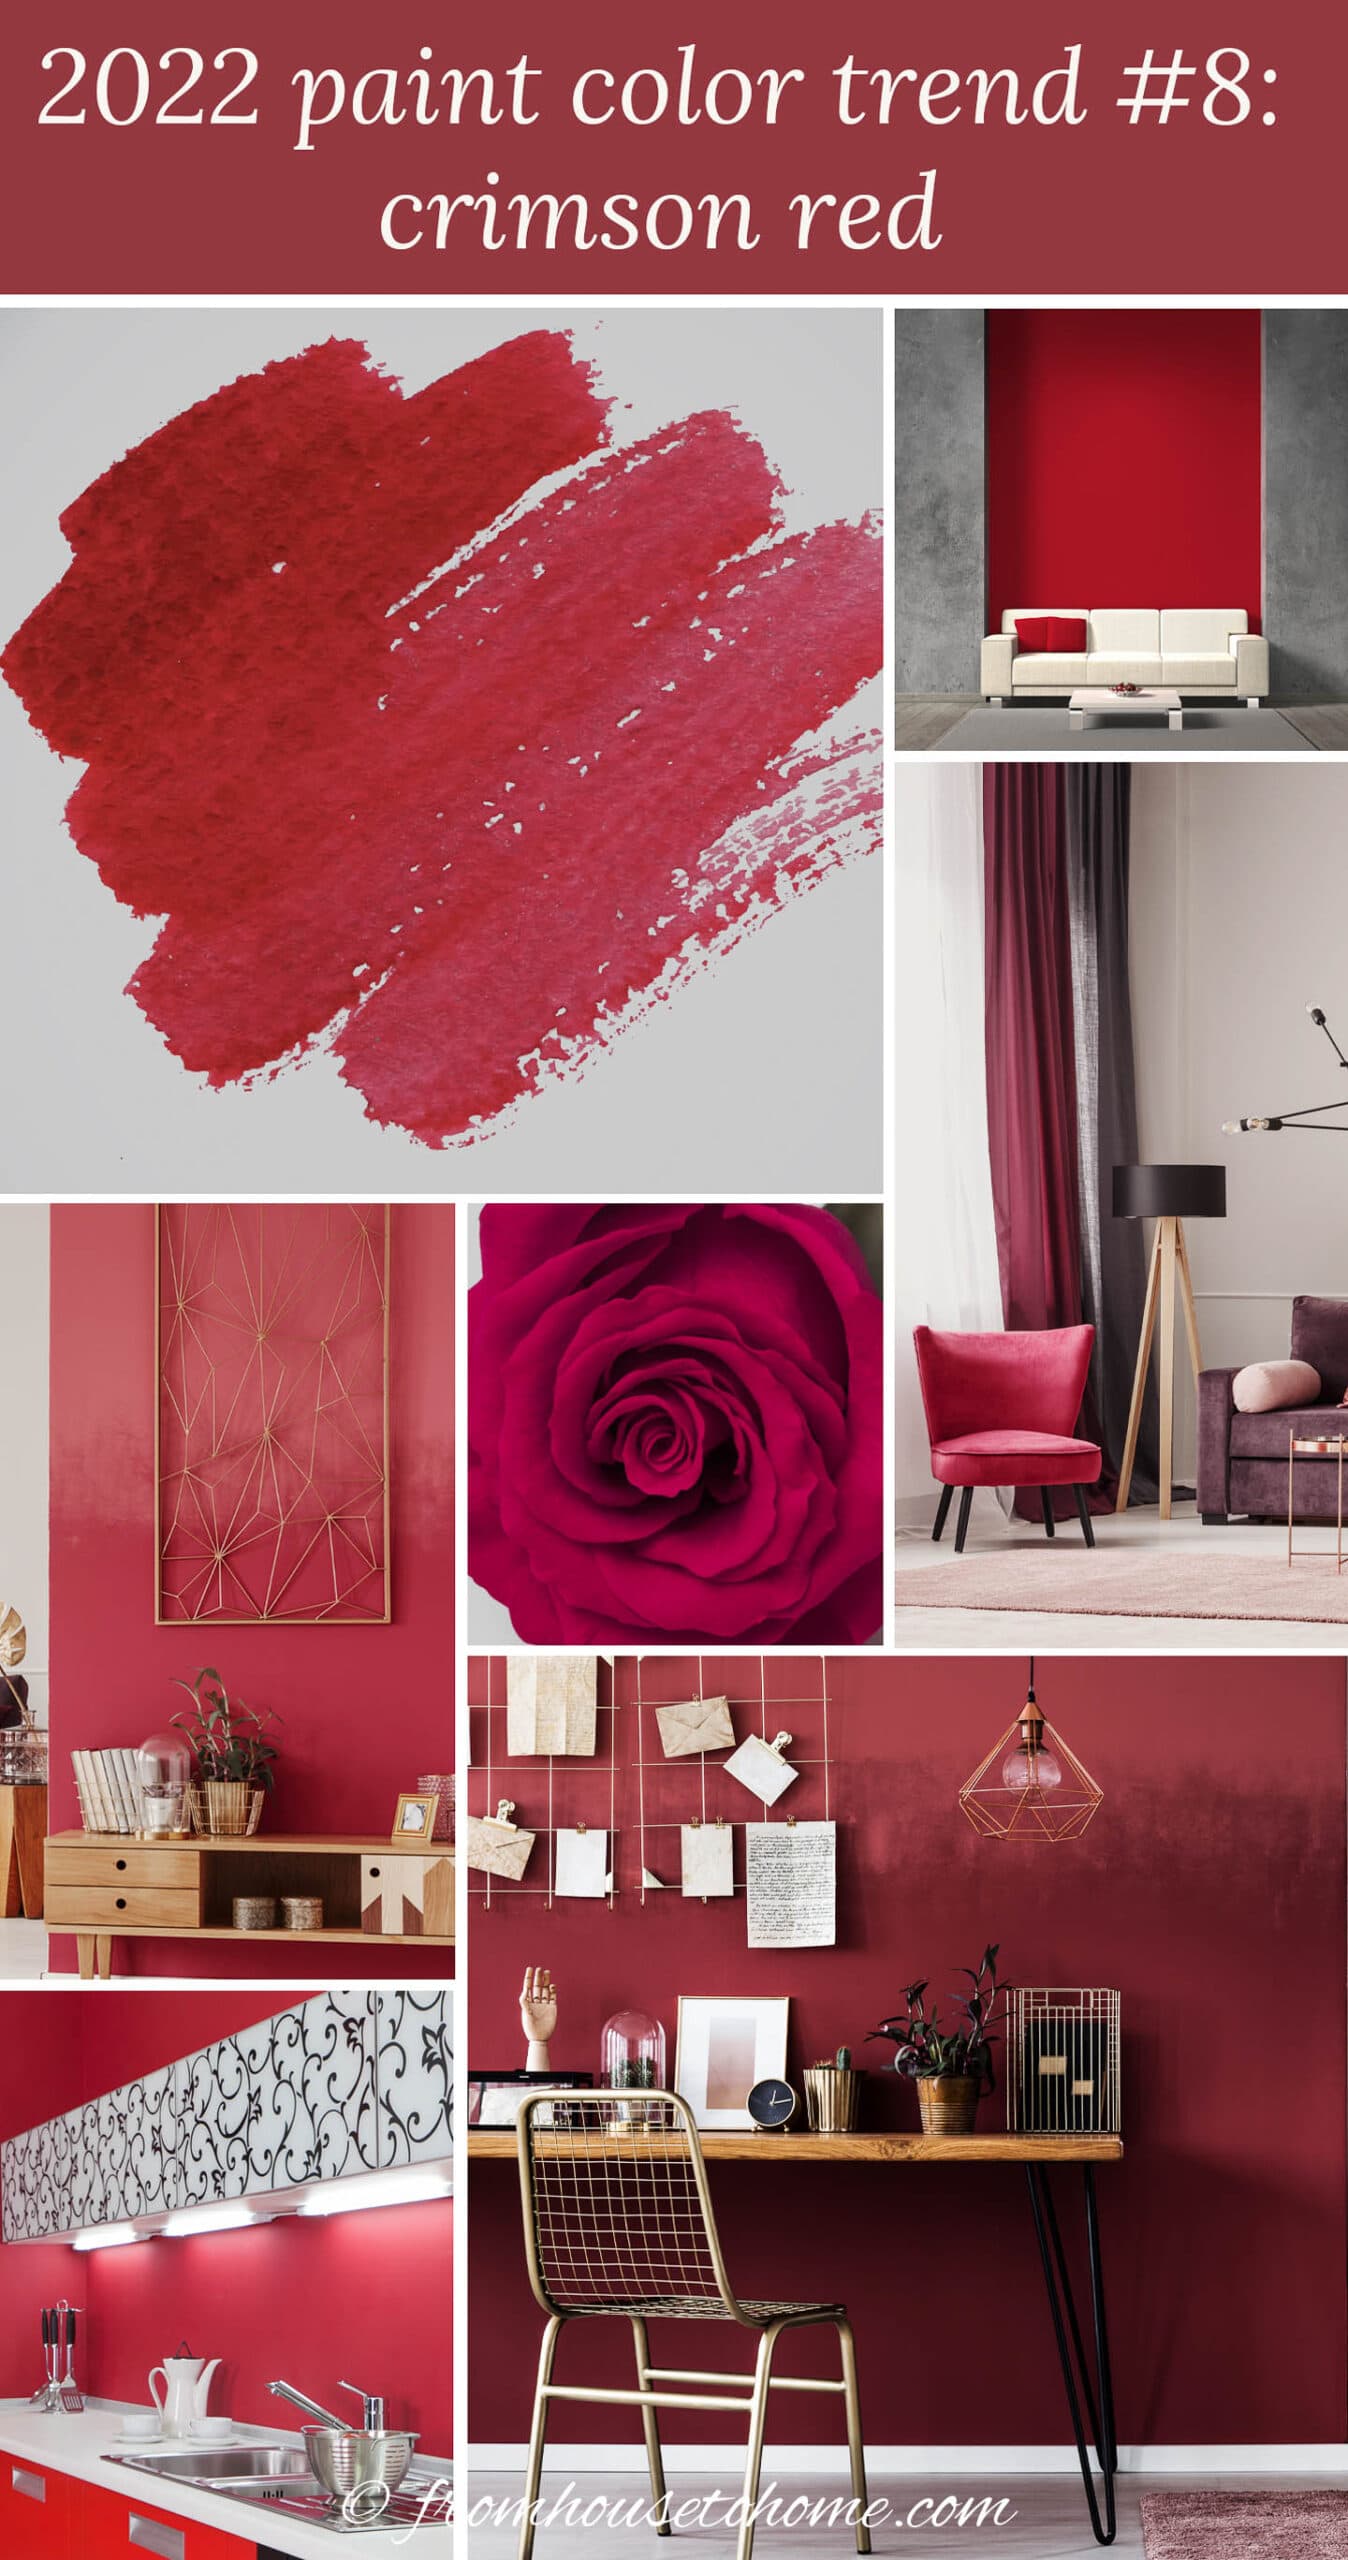 examples of crimson red colors including a paint swatch, a living room with red walls, a sitting area with red chair and curtains, a red rose, an office with red walls, a kitchen with red walls and a work space with red walls.